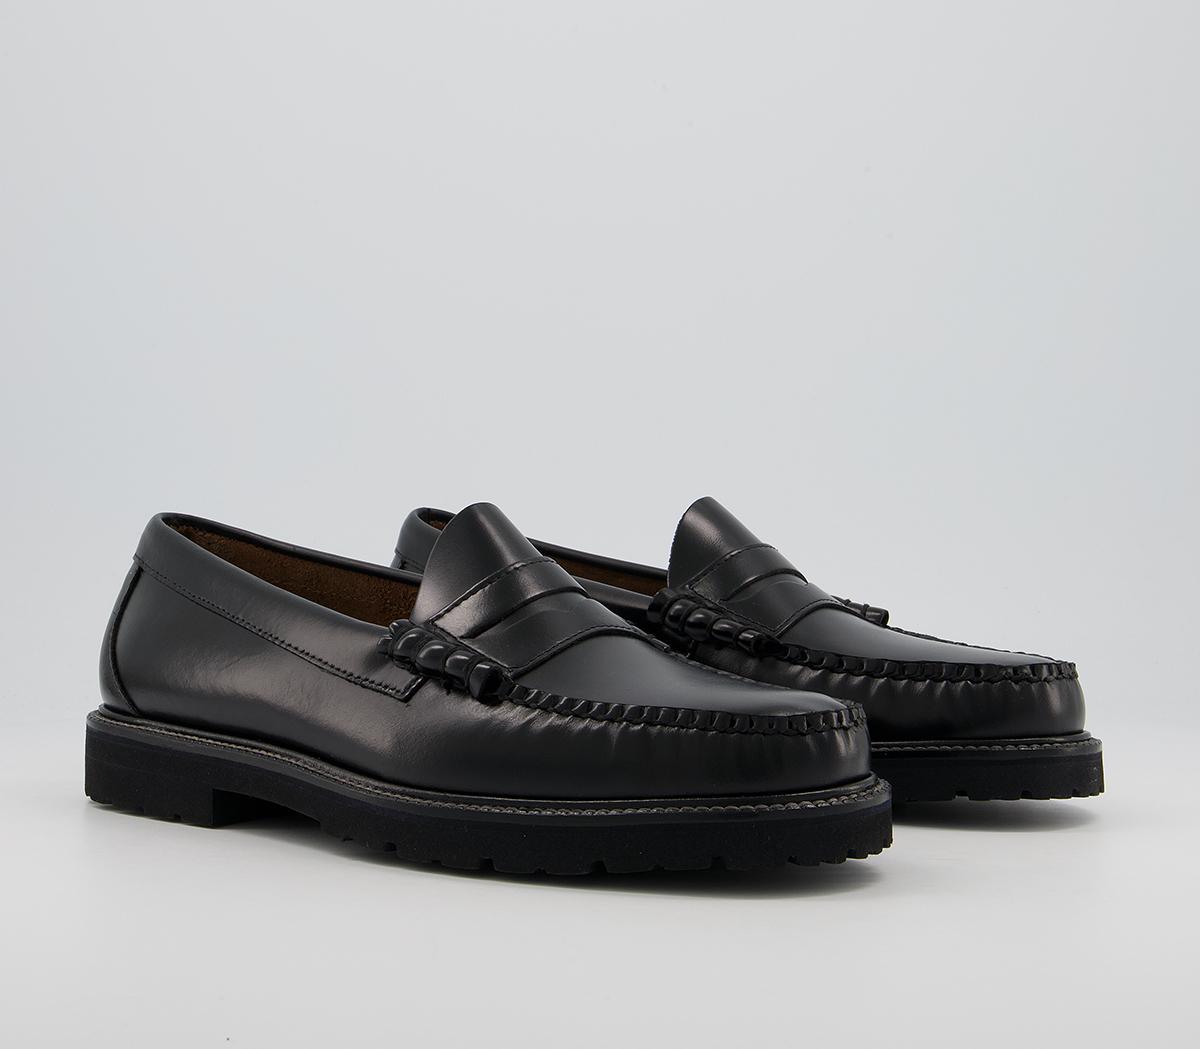 G.H Bass & Co Weejuns II 90s Larson Moc Penny Loafers Black Leather ...